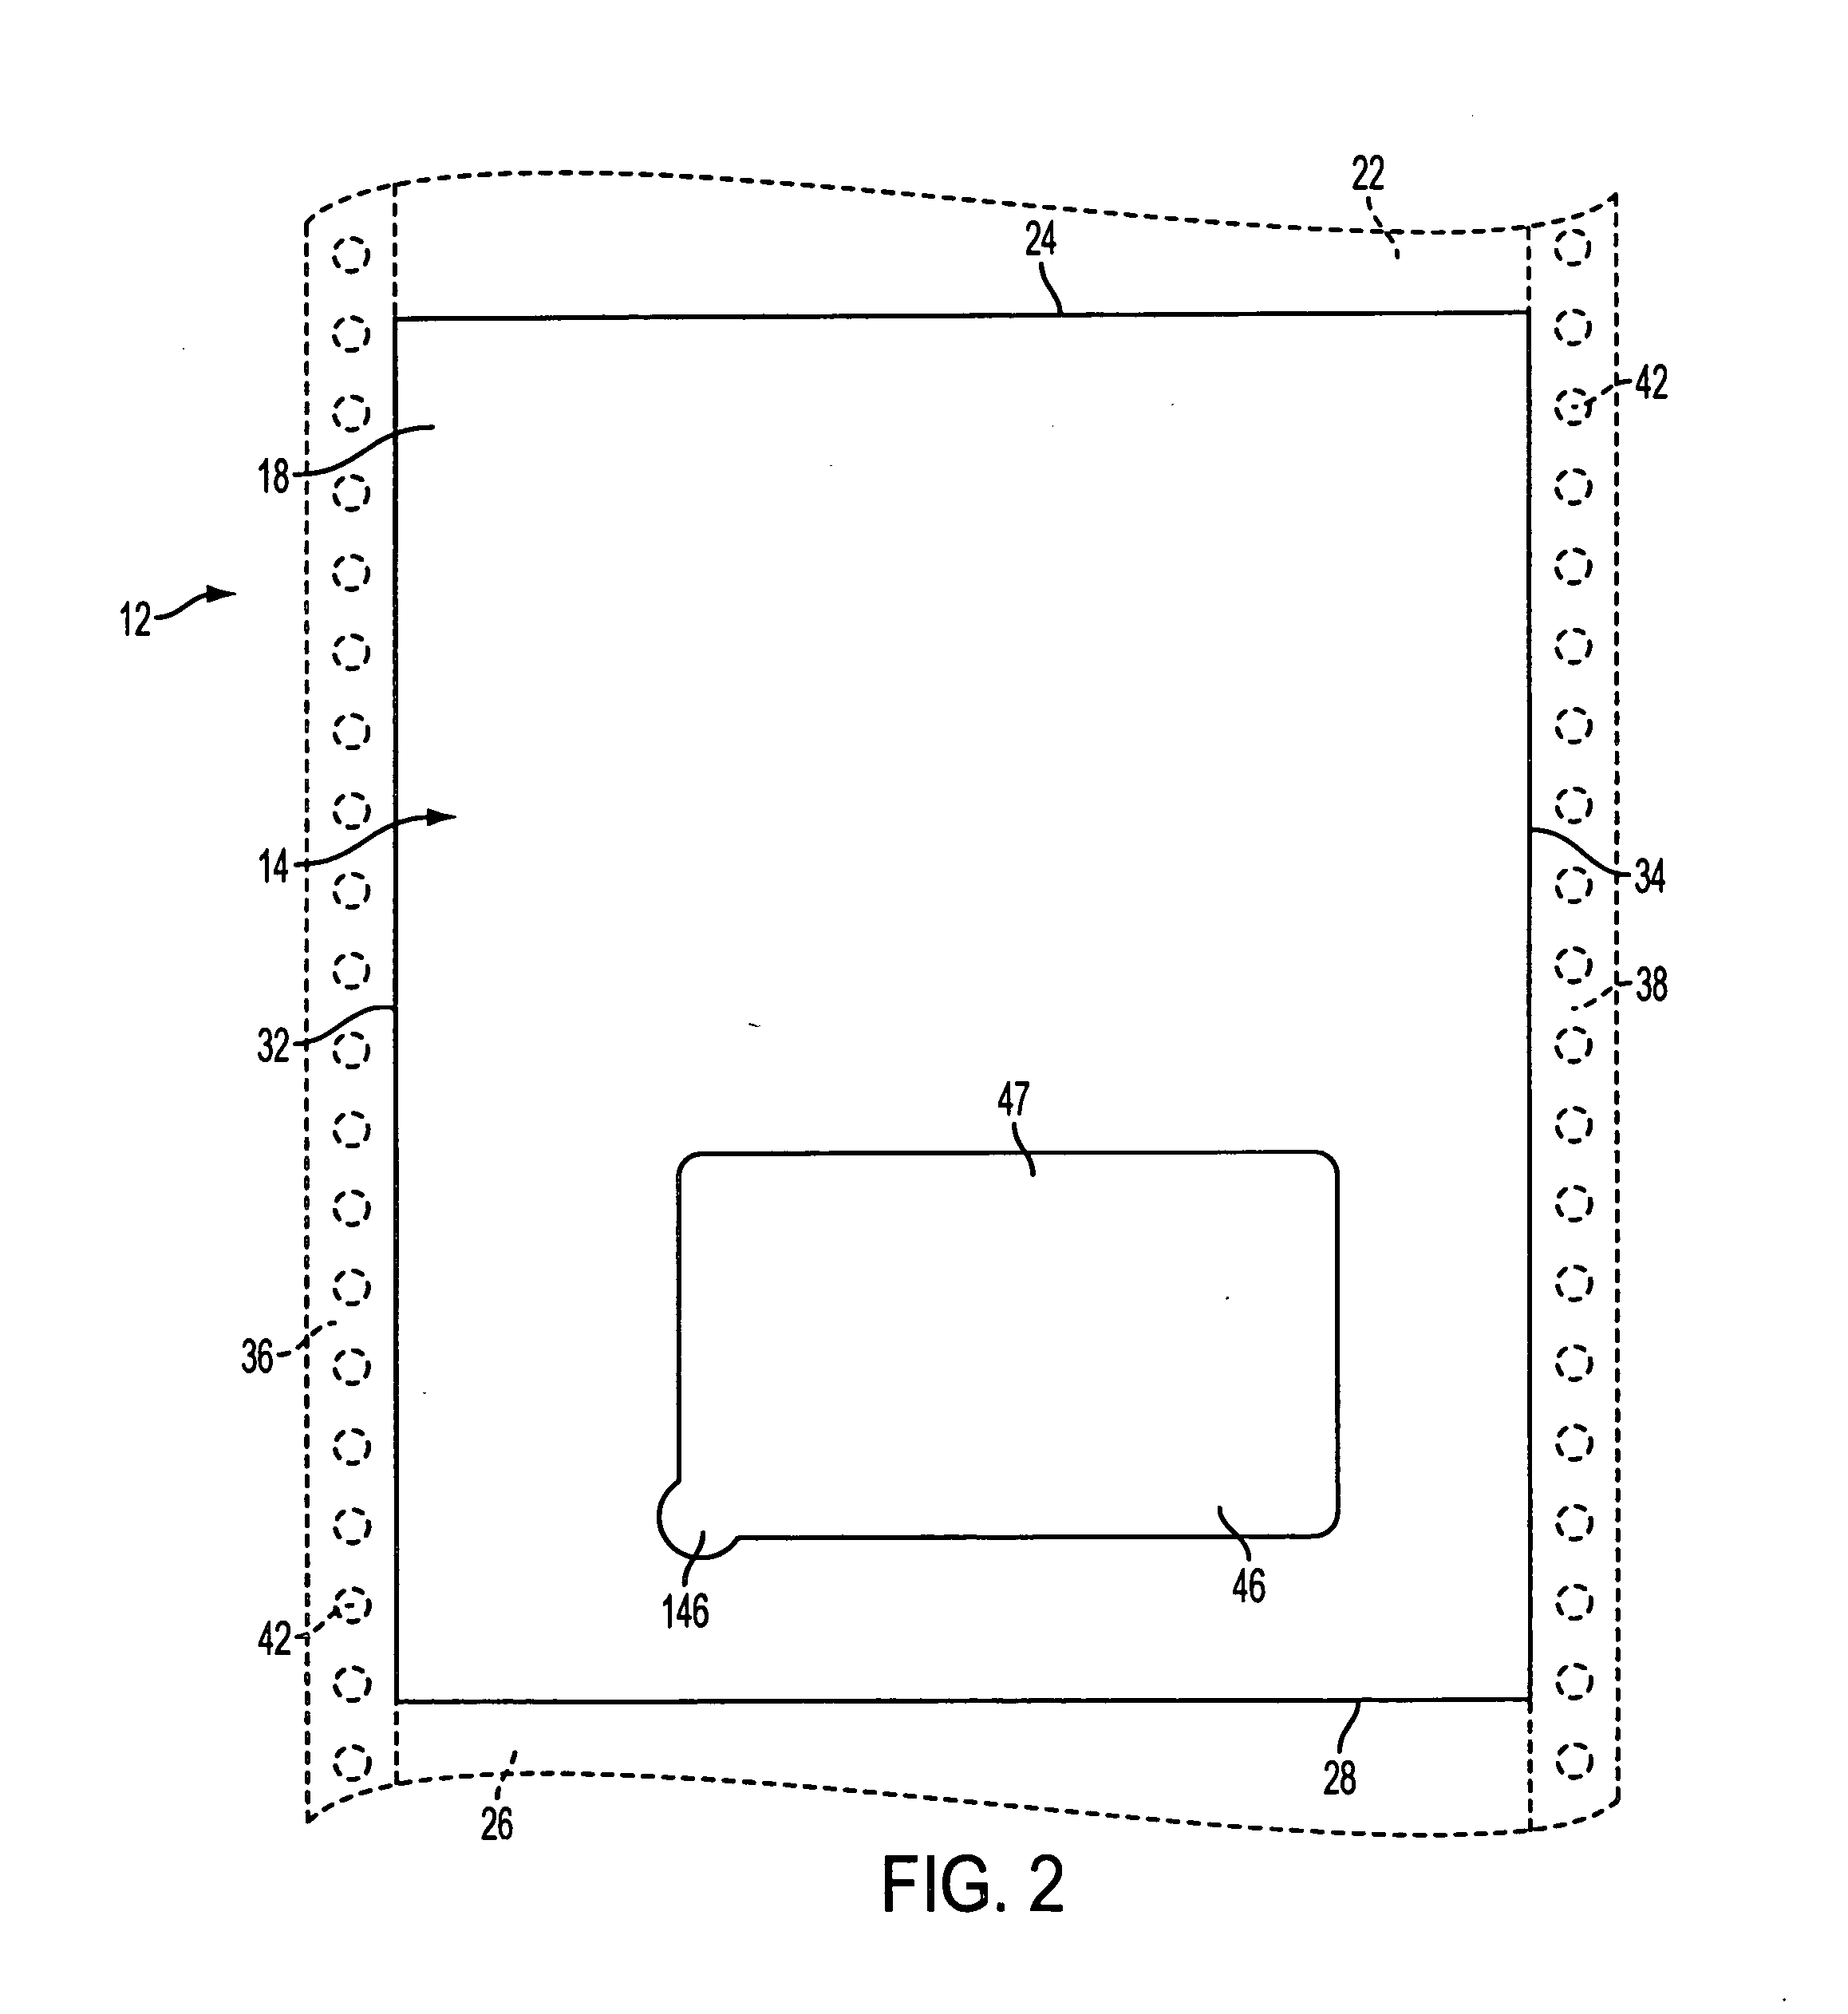 Document sheet with recessed cavity having an access tab for an object received therein